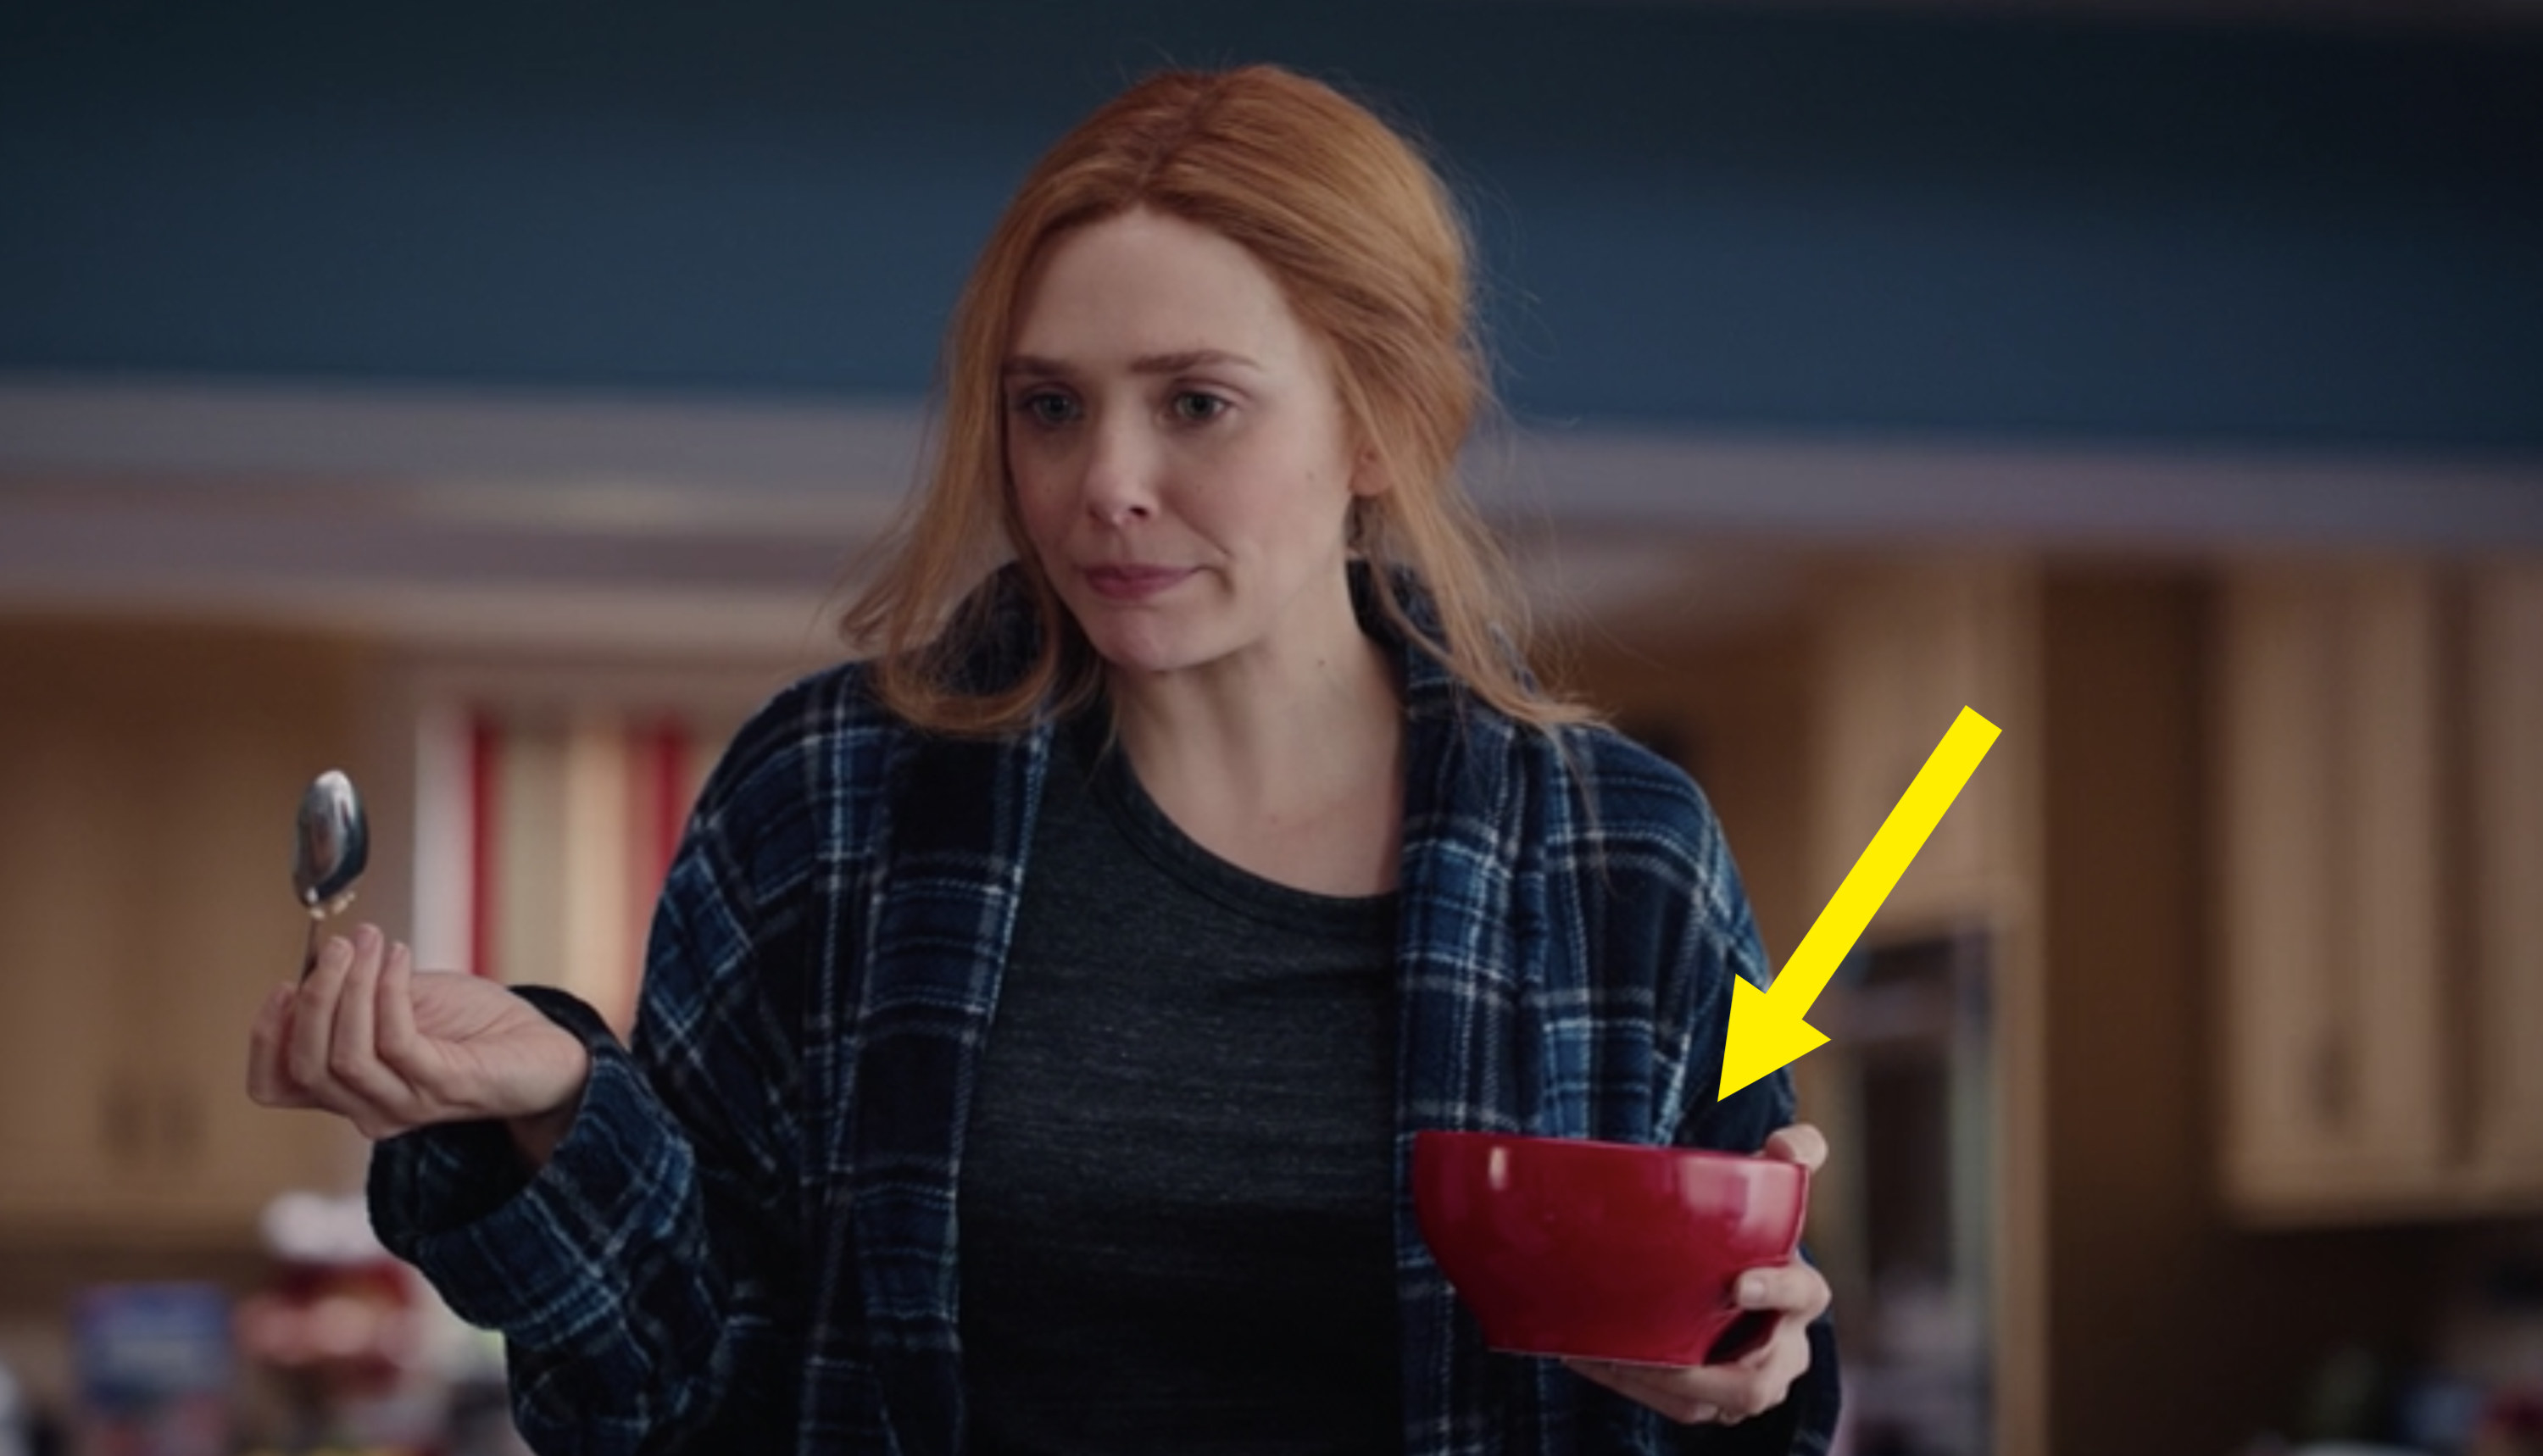 Wanda holding a red cereal bowl